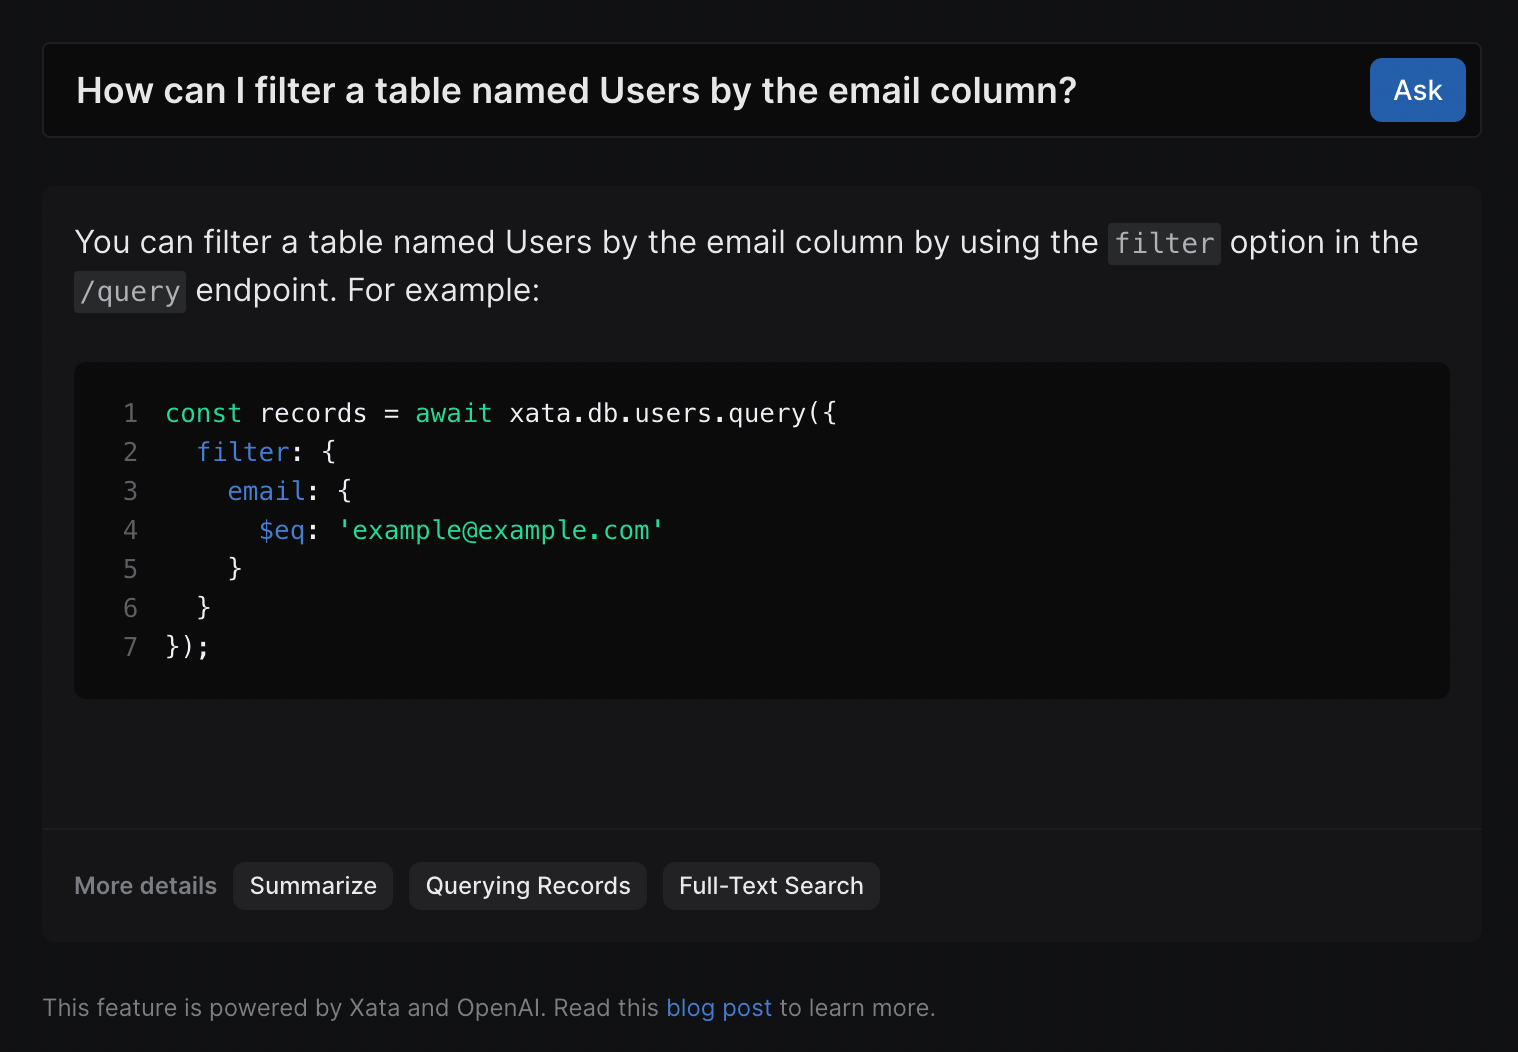 Question for the Xata bot: How can I filter a table named Users by the email column?